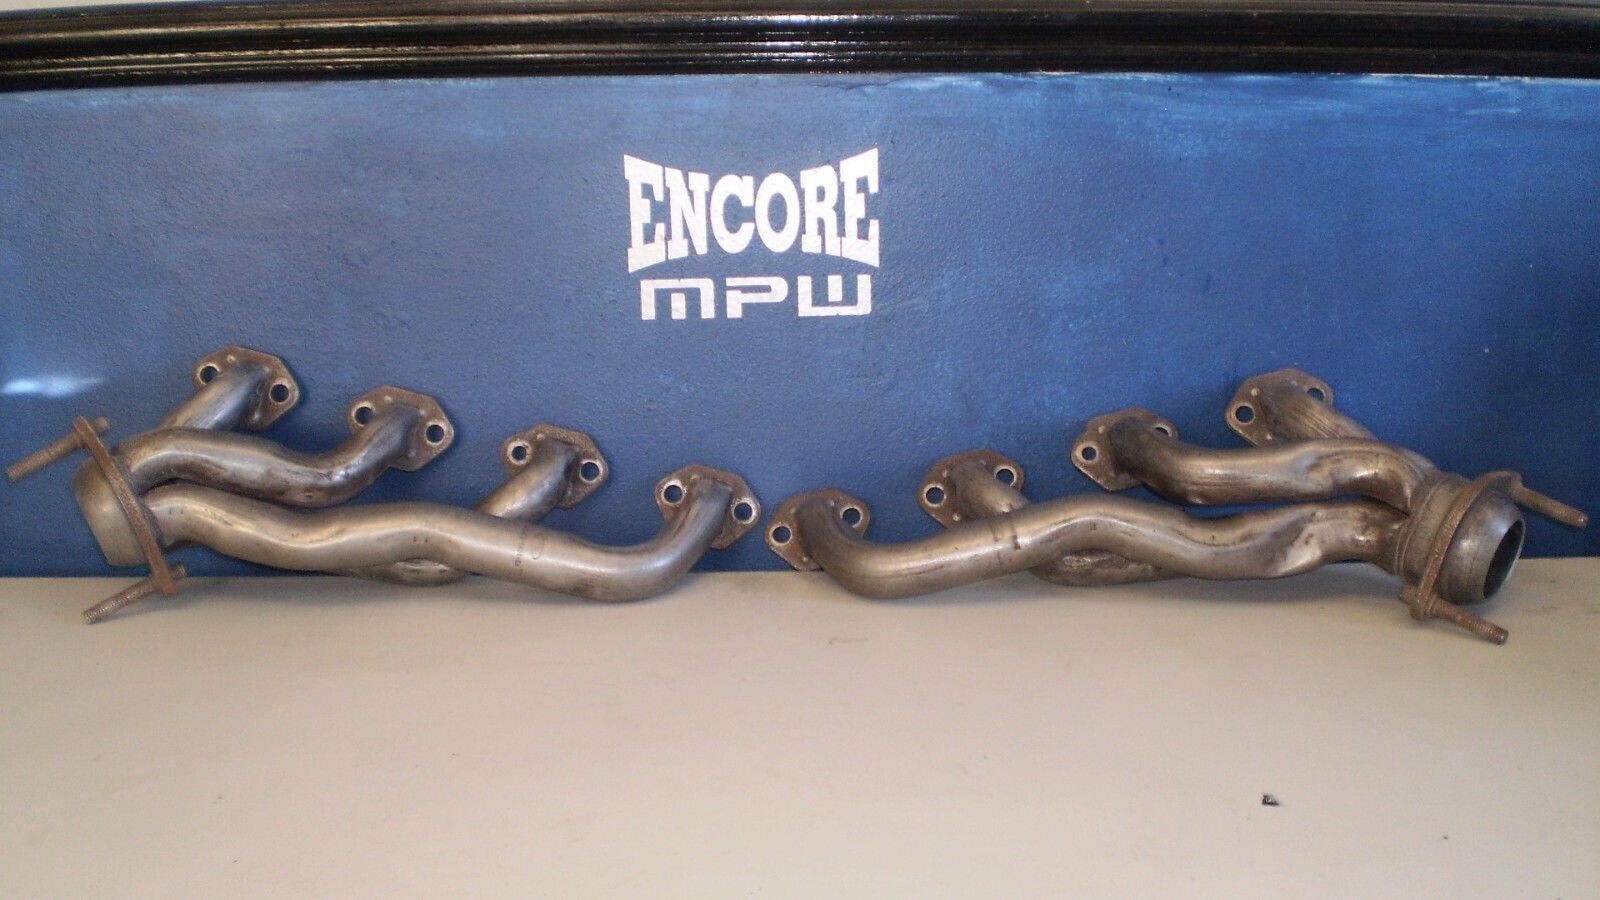 1986-1993 Ford Mustang Capri 5.0L Used Factory Stock Exhaust Headers 302 sbf